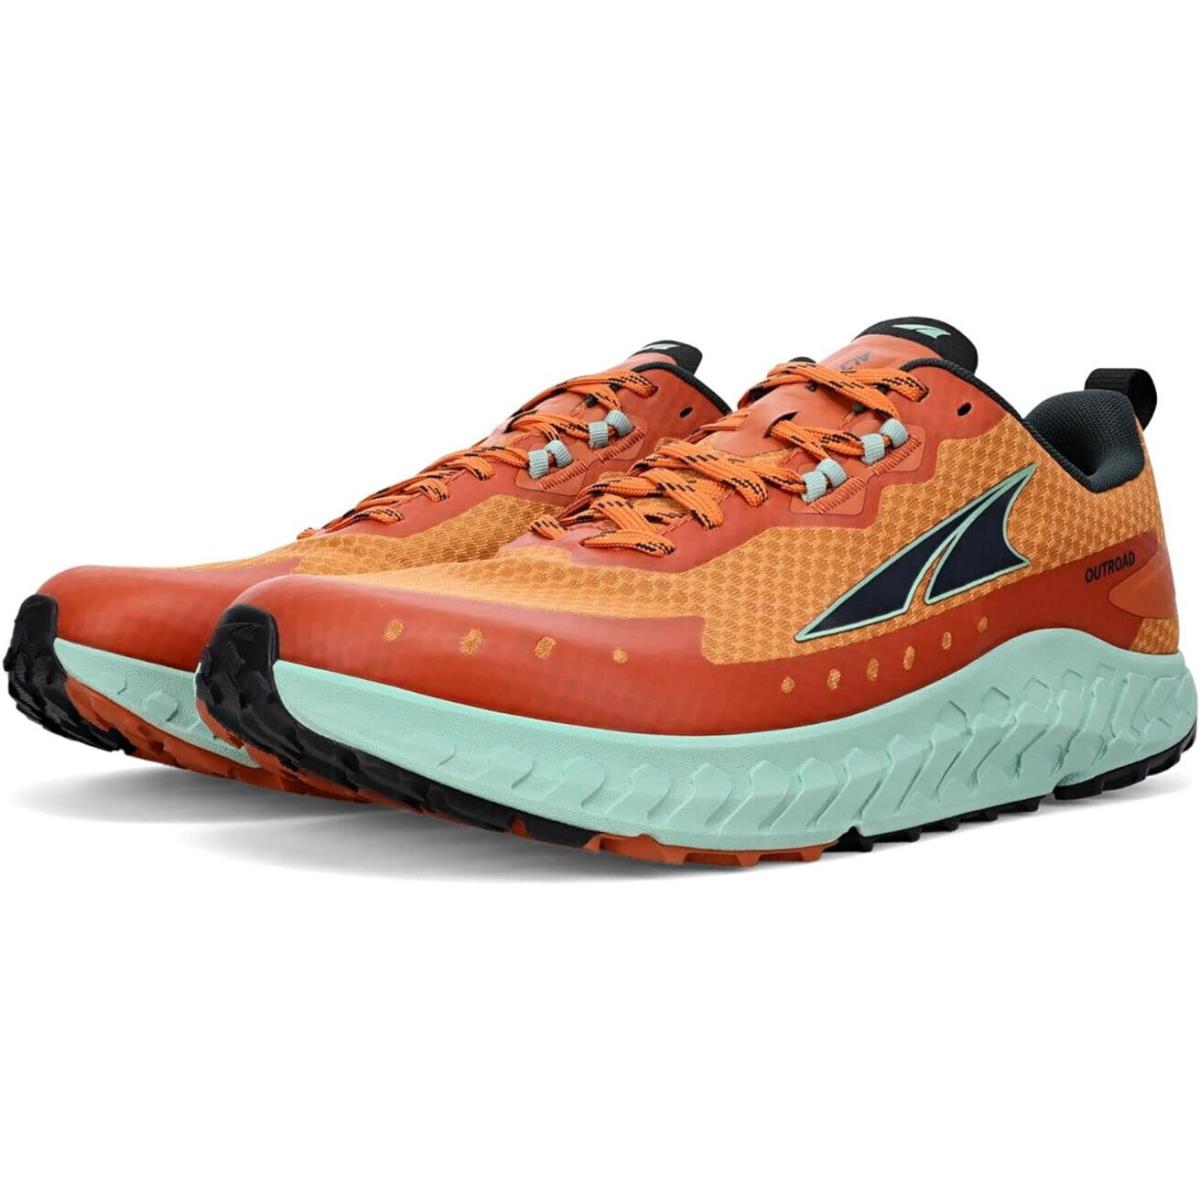 Altra Men`s Outroad US 12 M Green Orange Synthetic Trail Running Sneaker Shoes - Orange